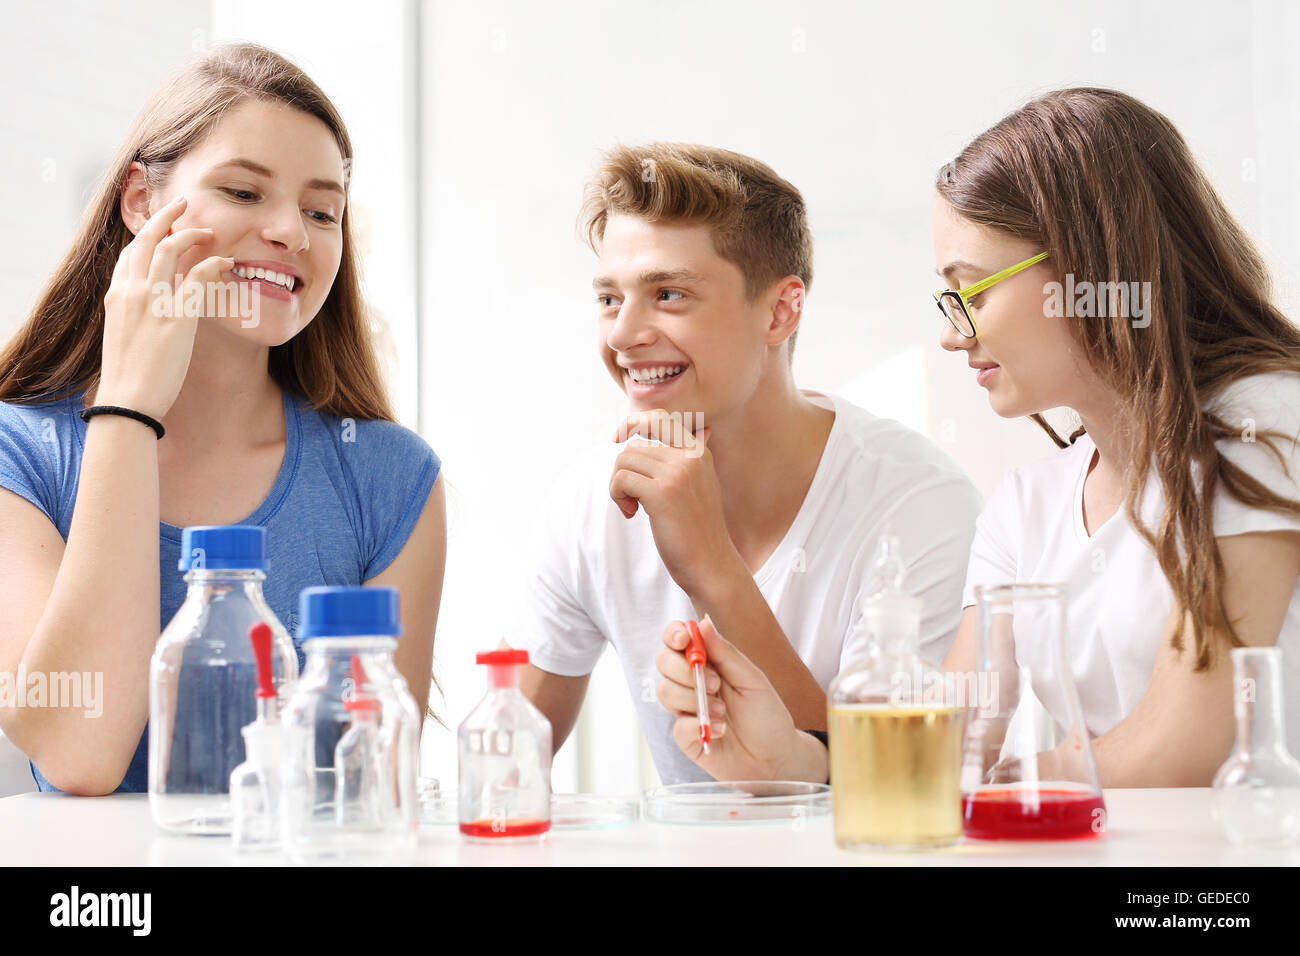 School lesson in chemistry lab. Stock Photo